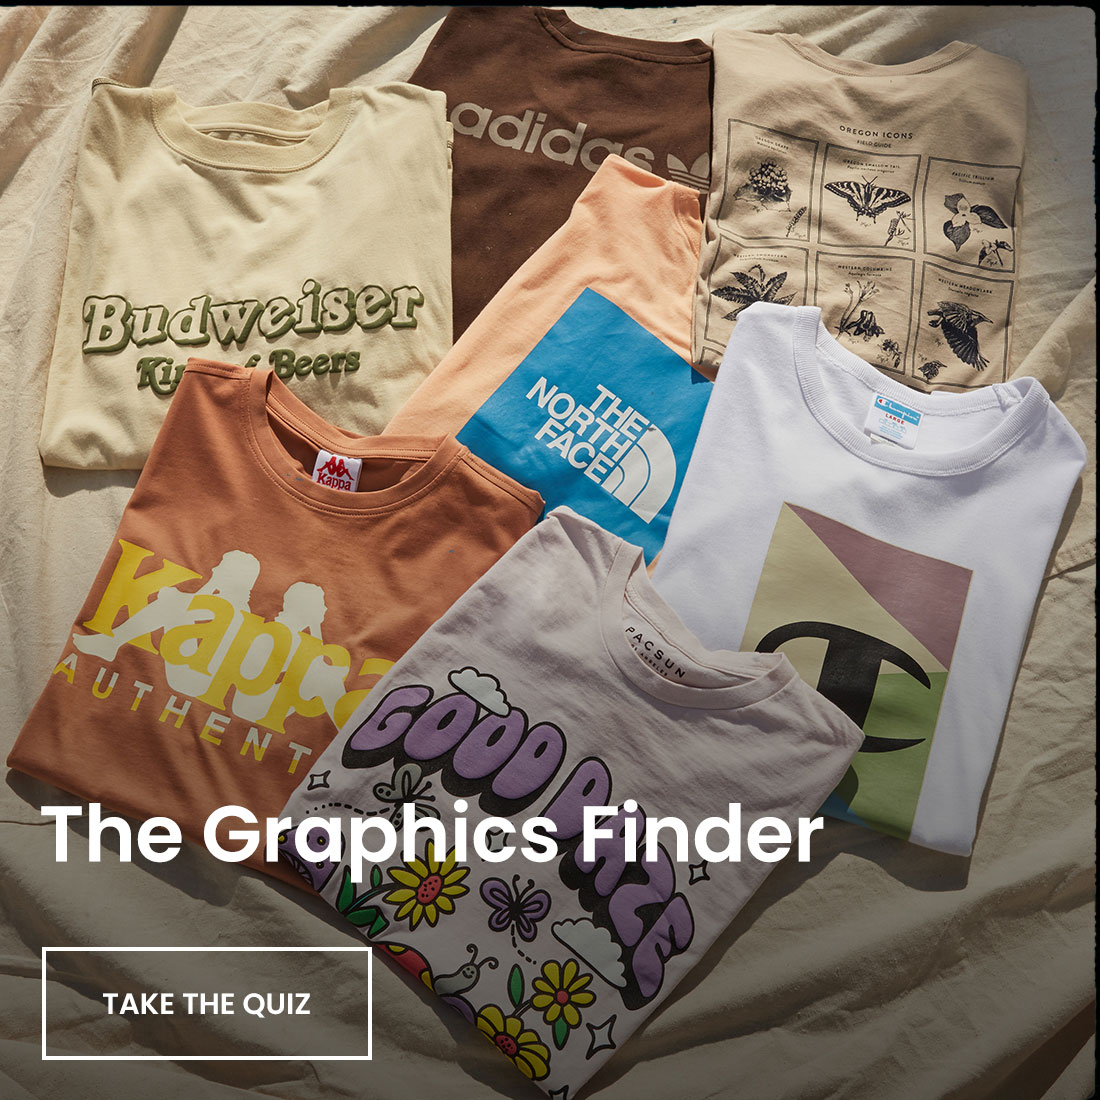 Graphic Tees for Men | PacSun